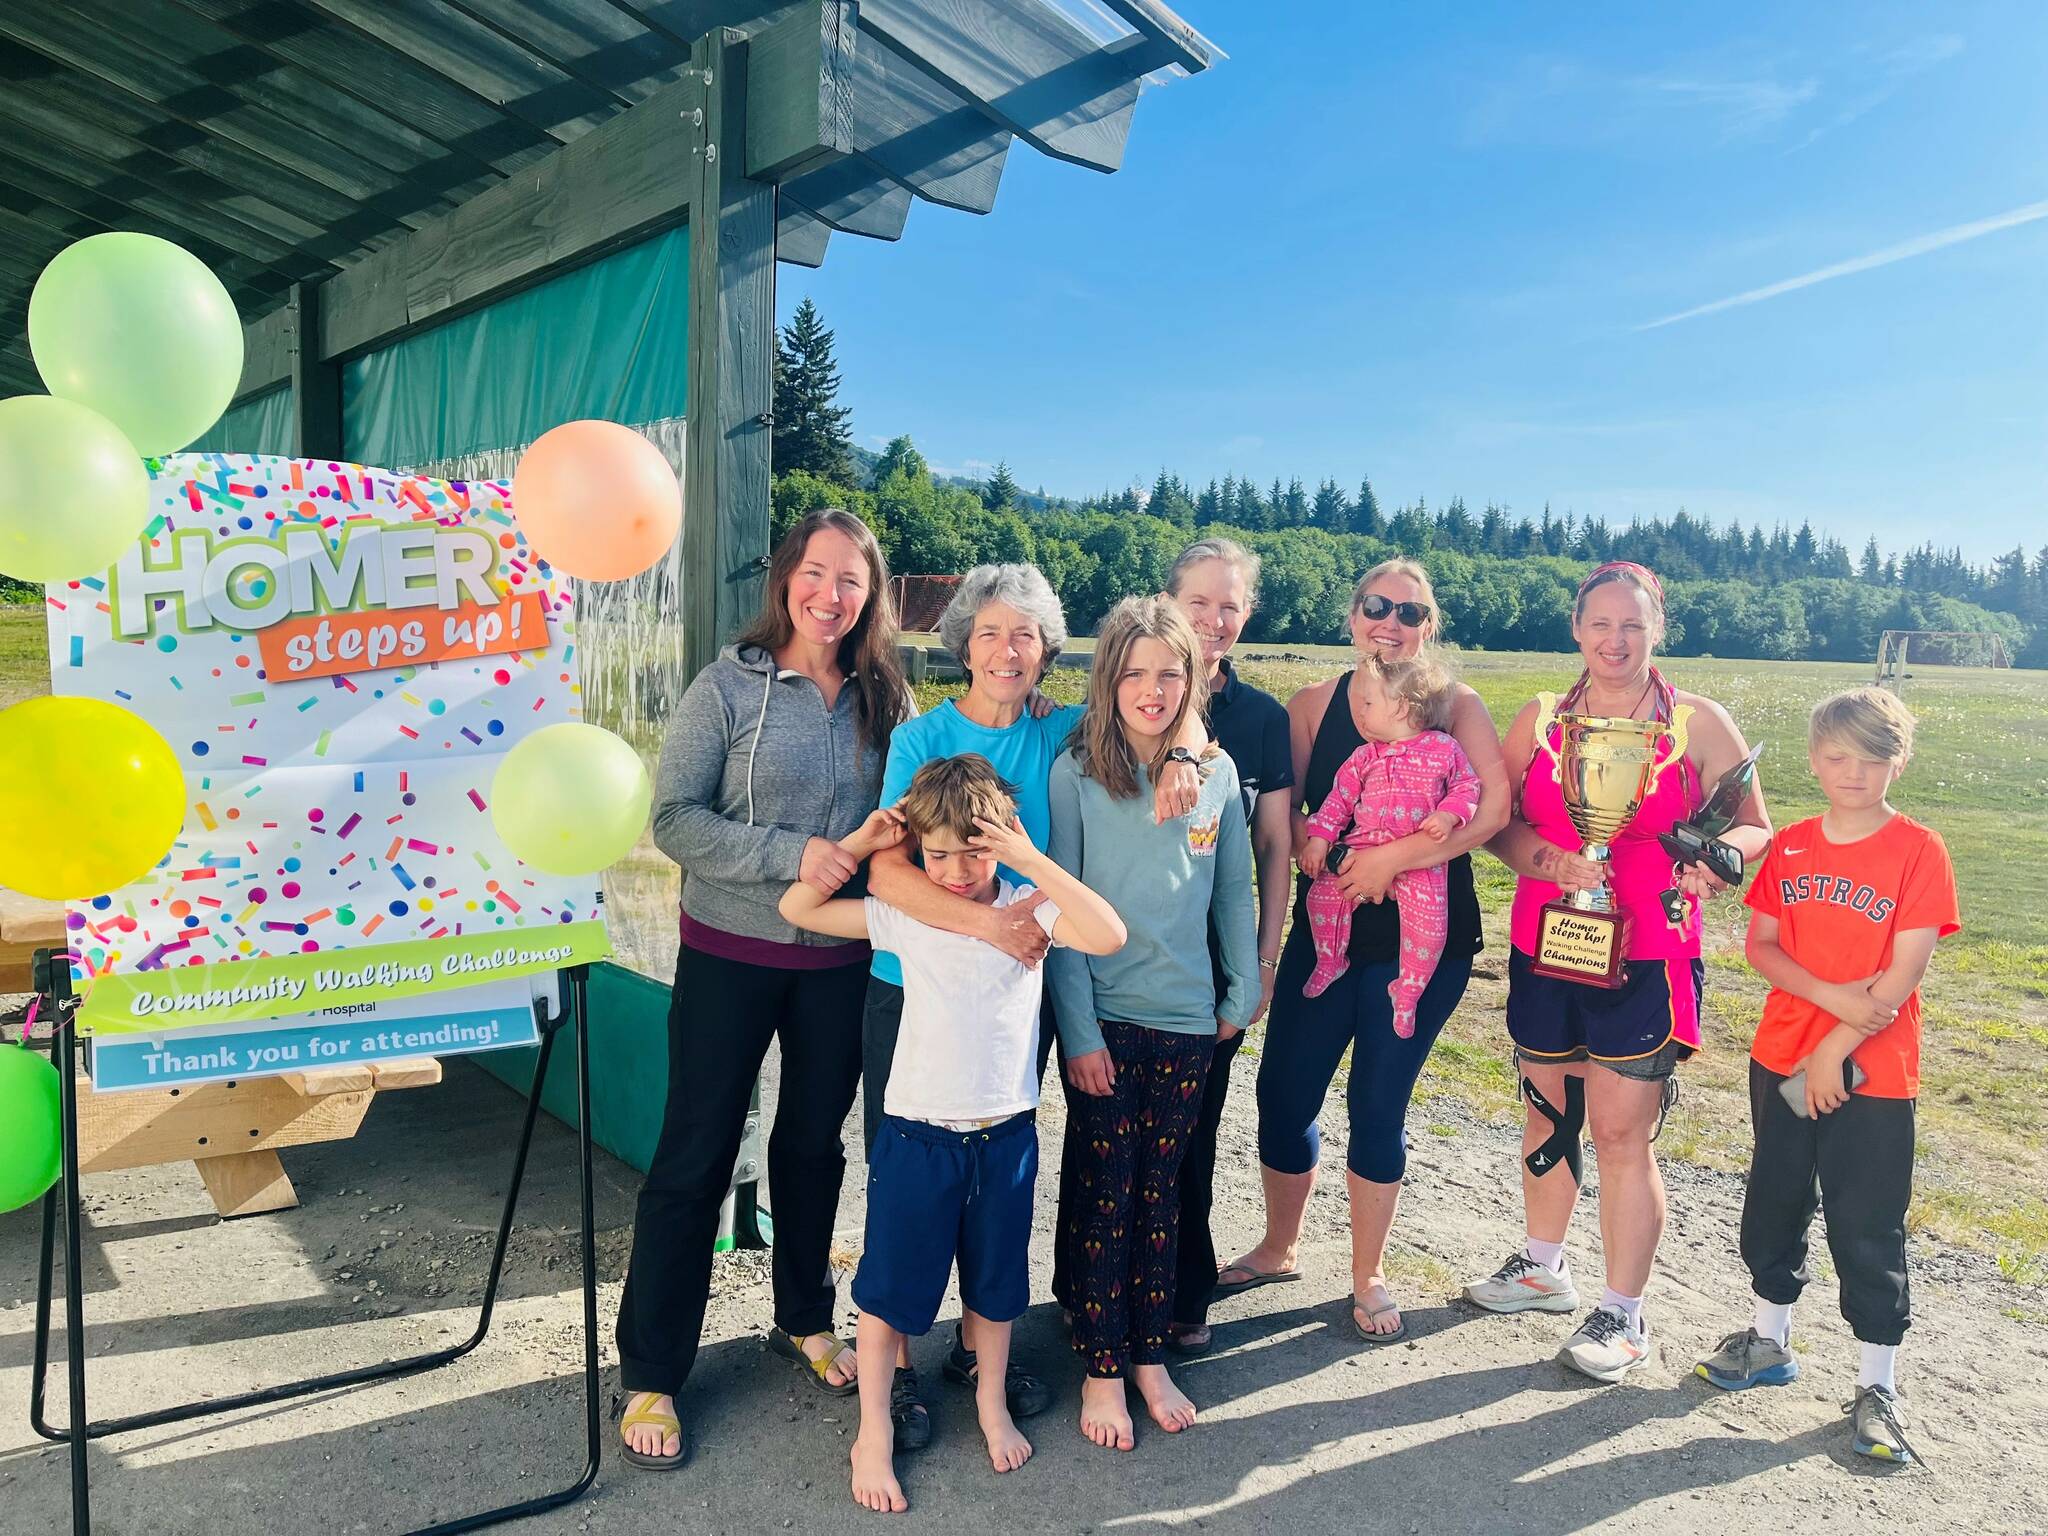 The 2022 Homer Steps champions, the “Sweaty Bettys,” attend the end-of-challenge awards event in Homer, Alaska. (Photo provided by South Peninsula Hospital)